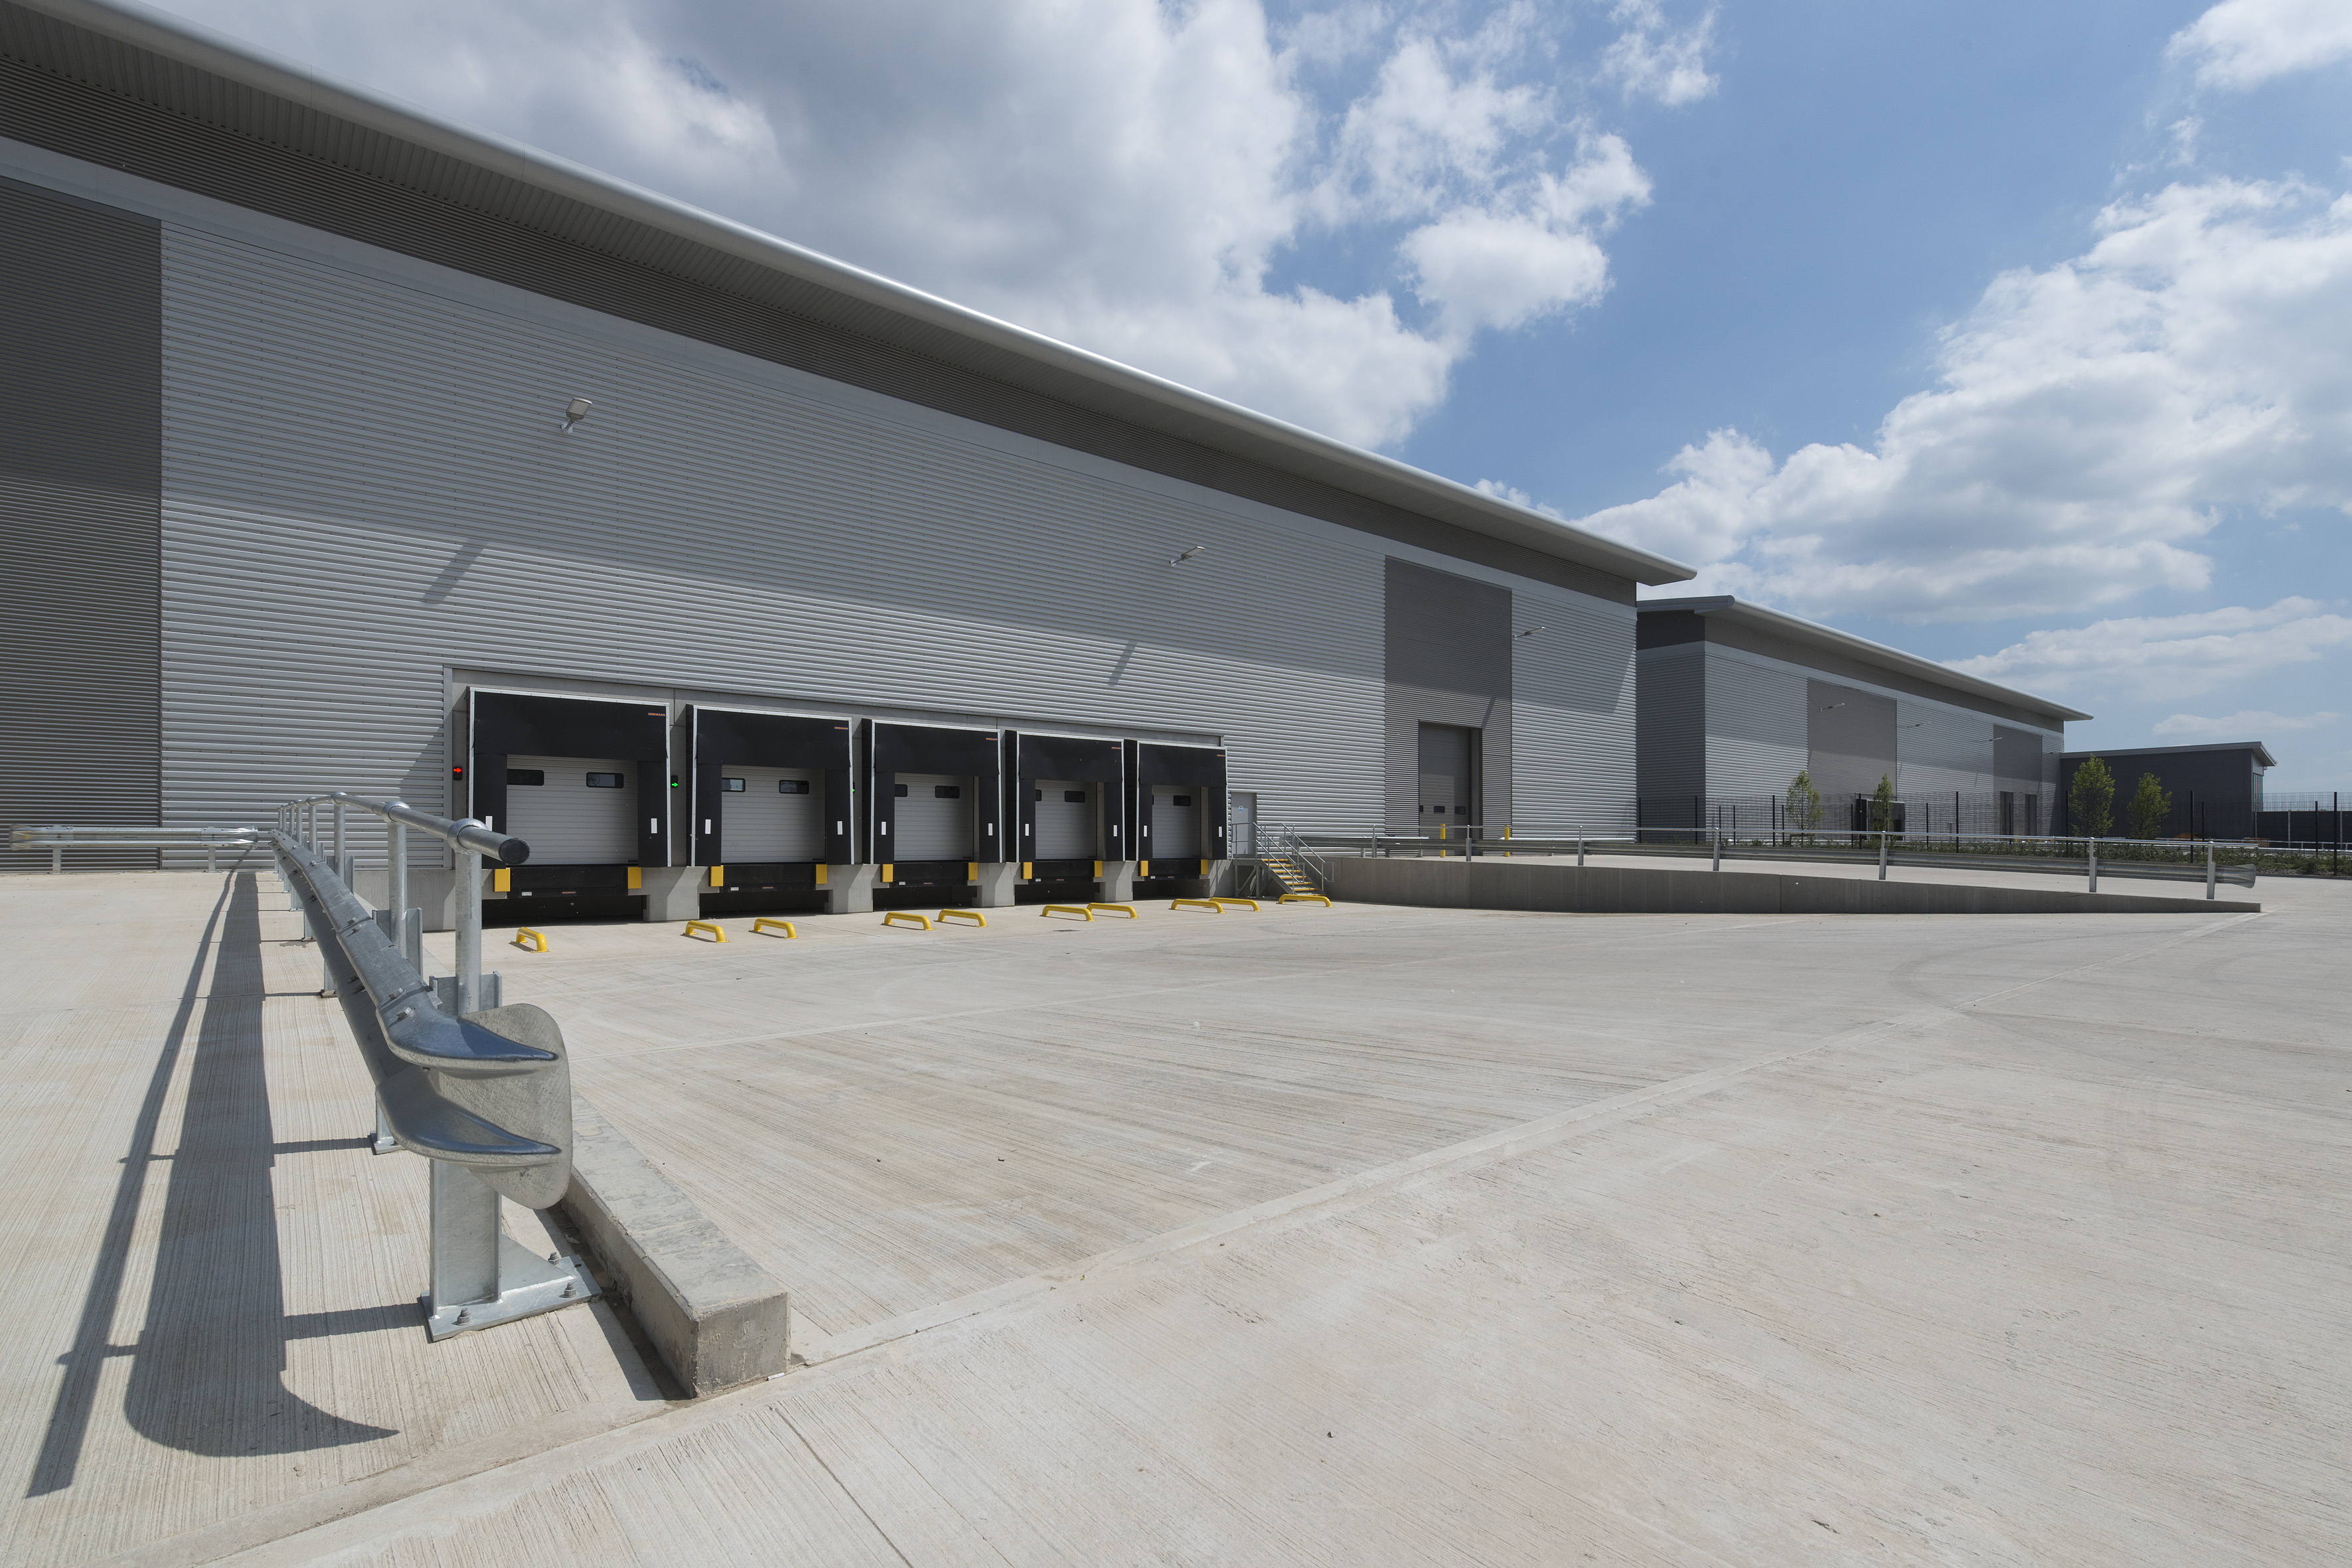 Peel Logistics Property Lets First Building at Island Road Reading Scheme To Argos